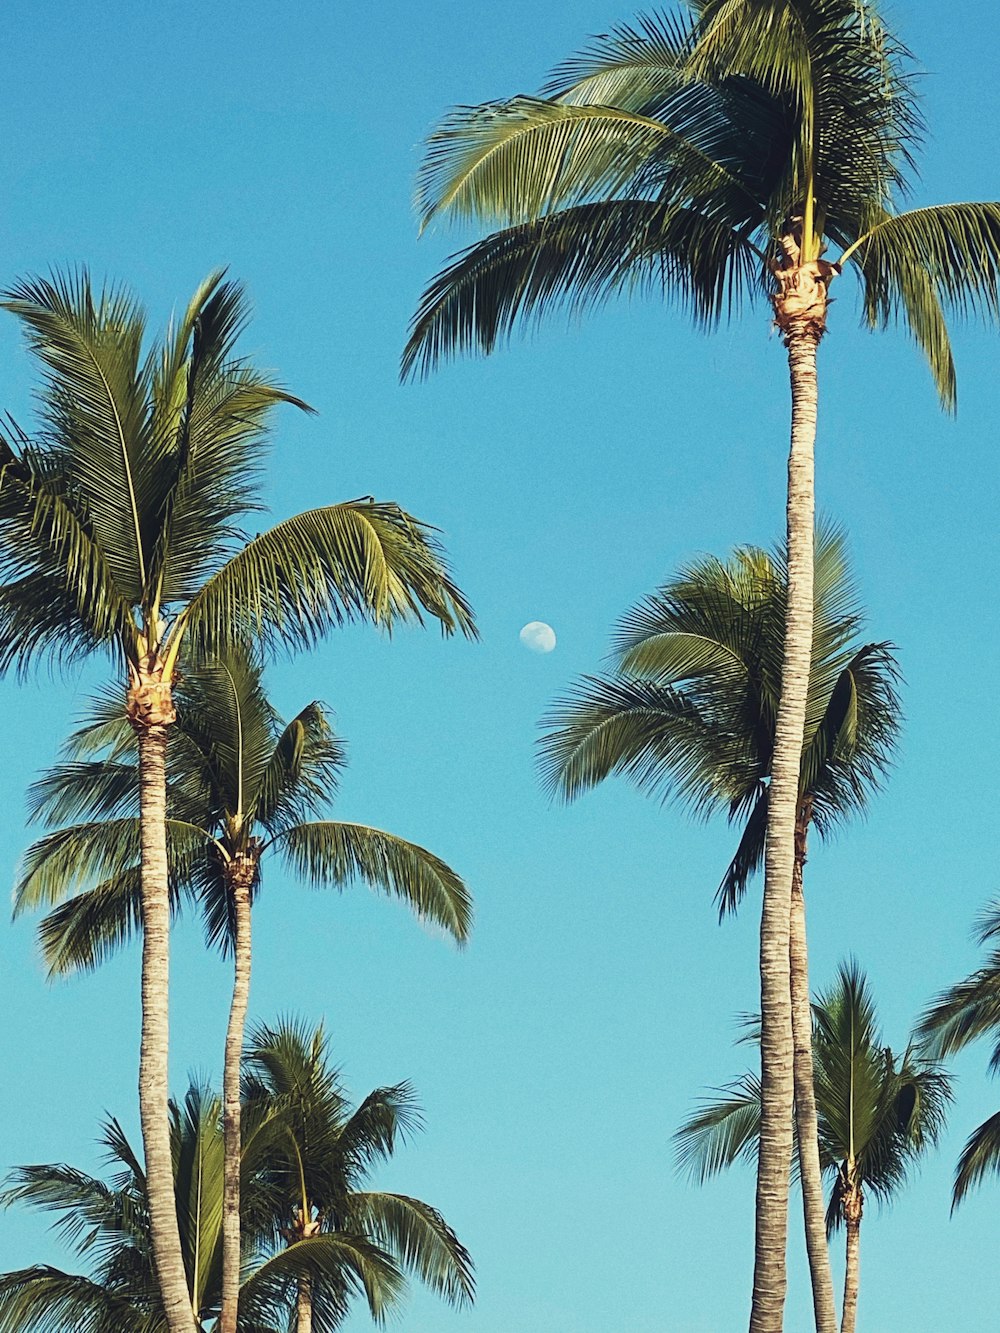 a group of palm trees with a half moon in the background